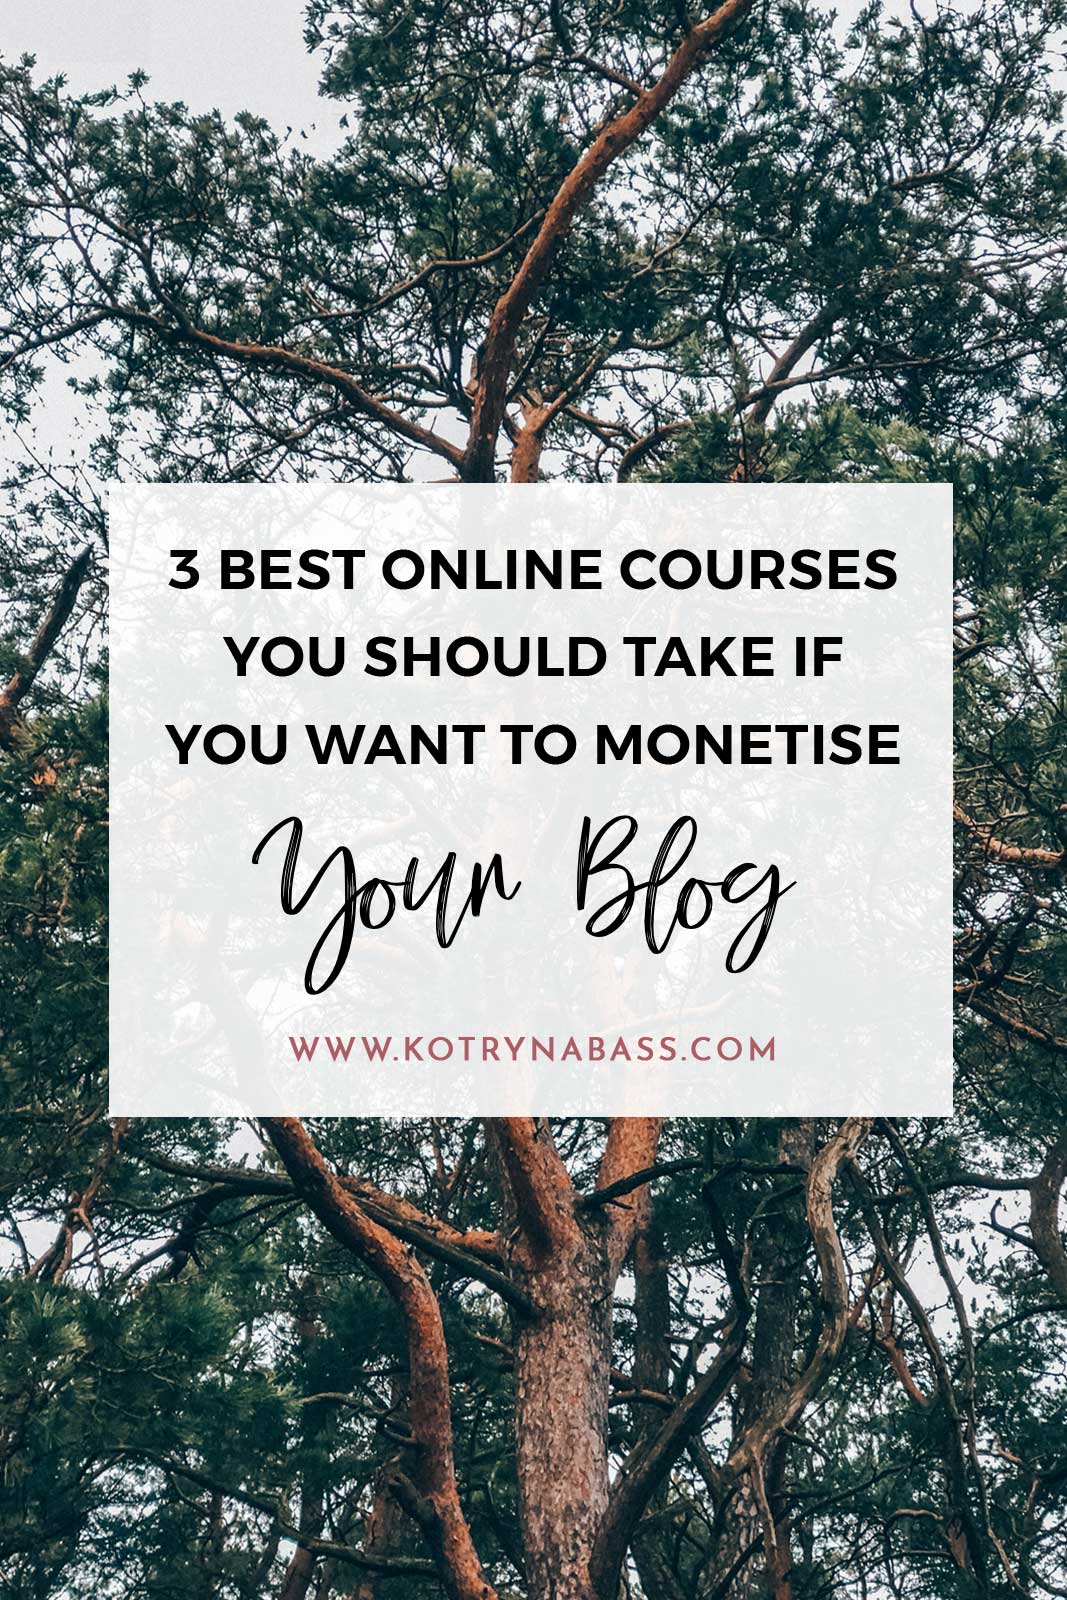 I strongly believe in alternative education, especially when it comes to blogging. There's no better way to learn about your blog's monetisation than getting inspired by those that already made it happen. Let me share three online courses you should take if you want to monetise your blog and have no idea where to begin.